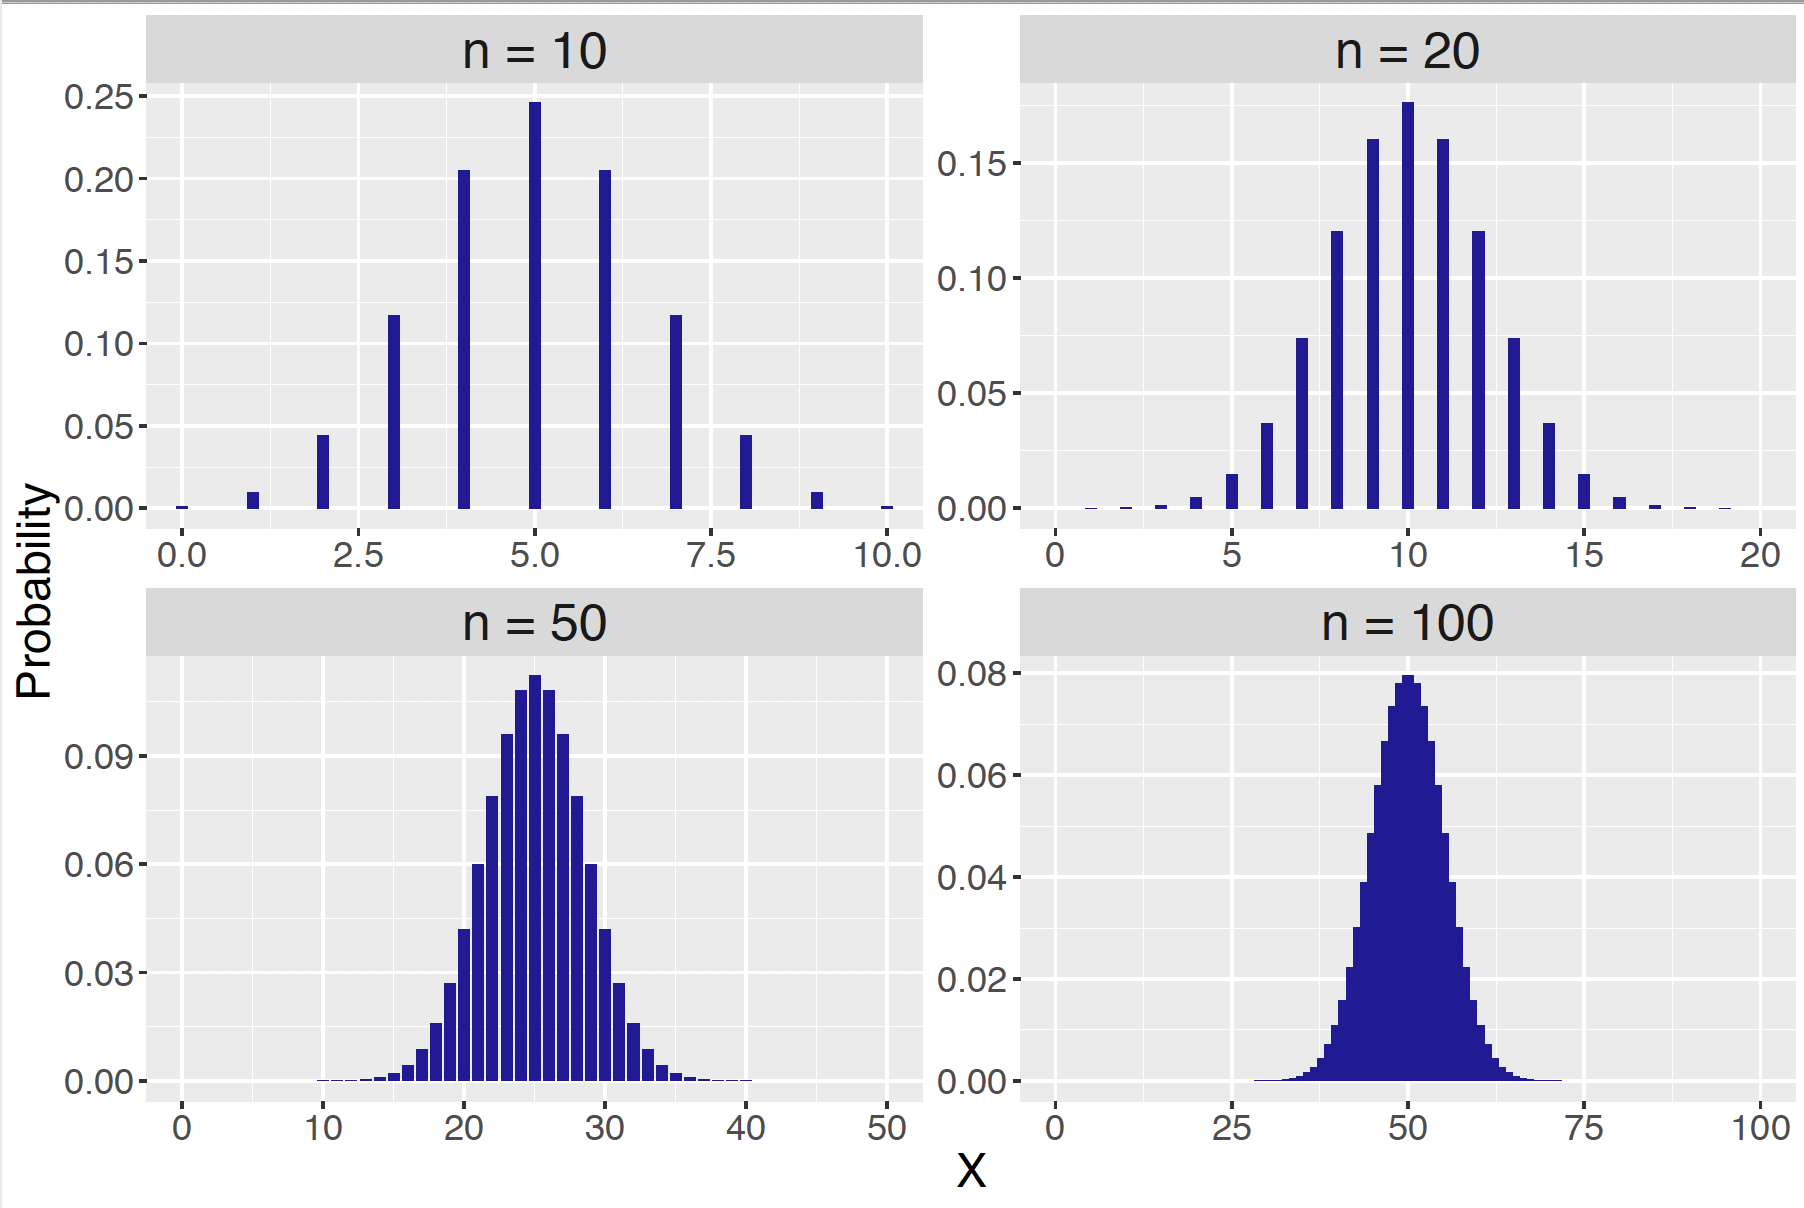 Binomial probabilities for sample sizes $n$ = 10, 20, 50, and 100, and success probability $p = 0.5$.